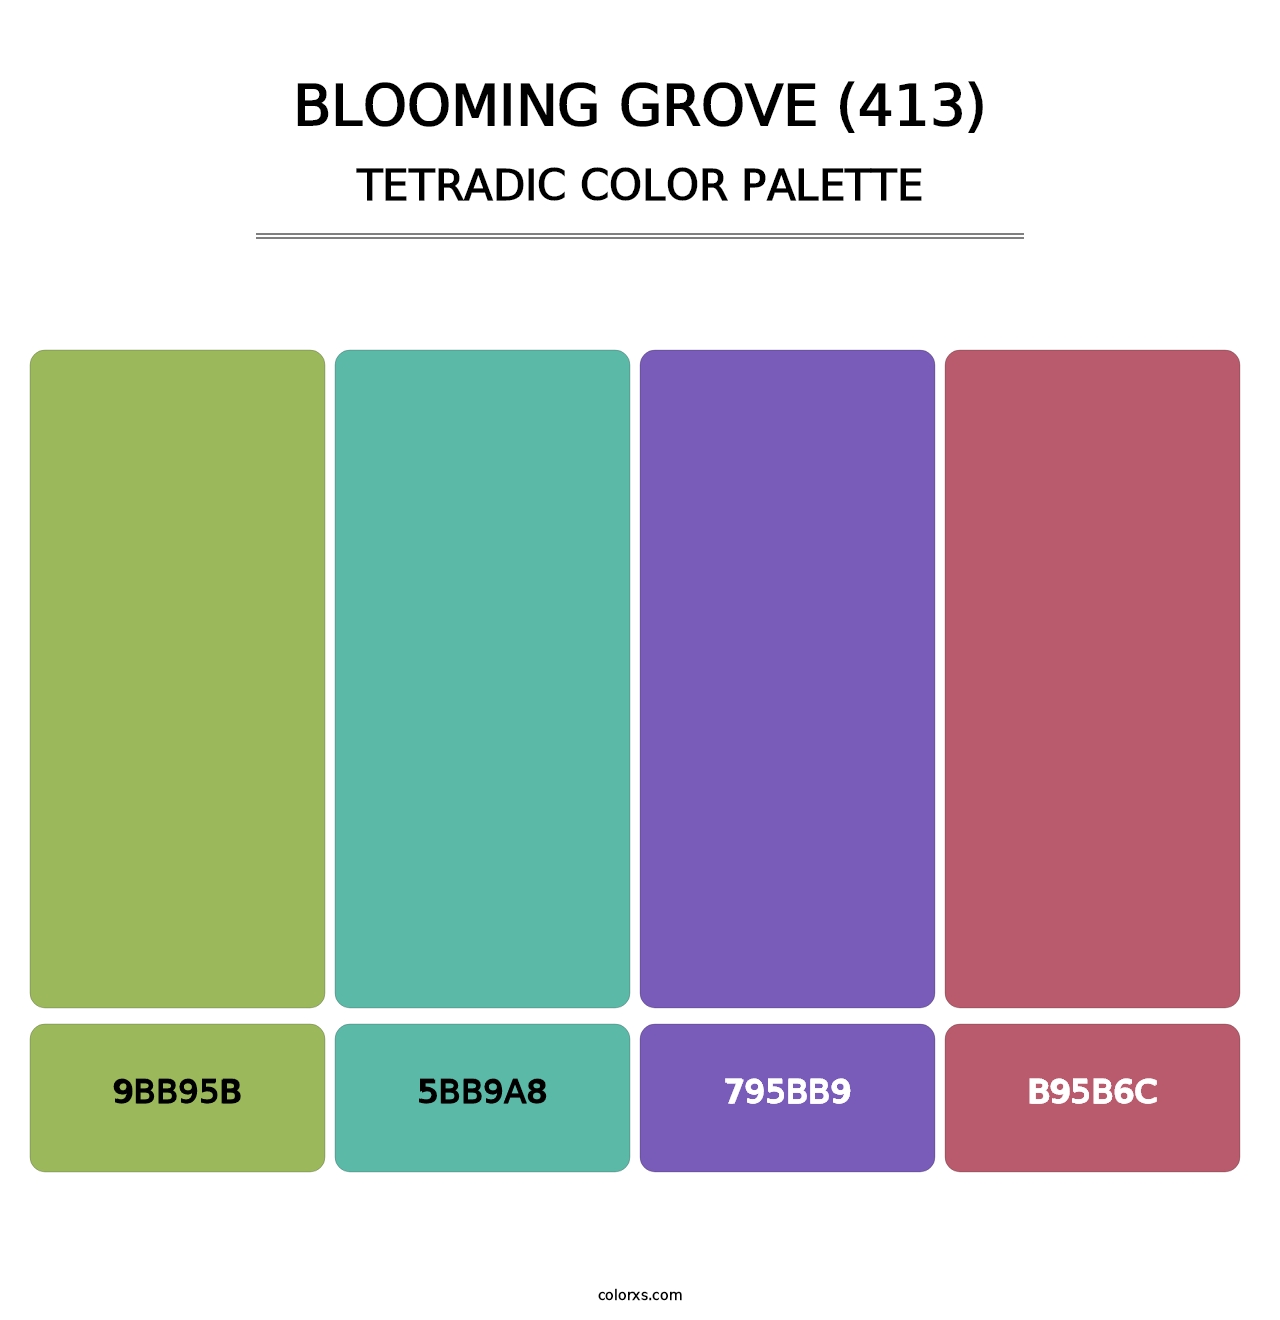 Blooming Grove (413) - Tetradic Color Palette